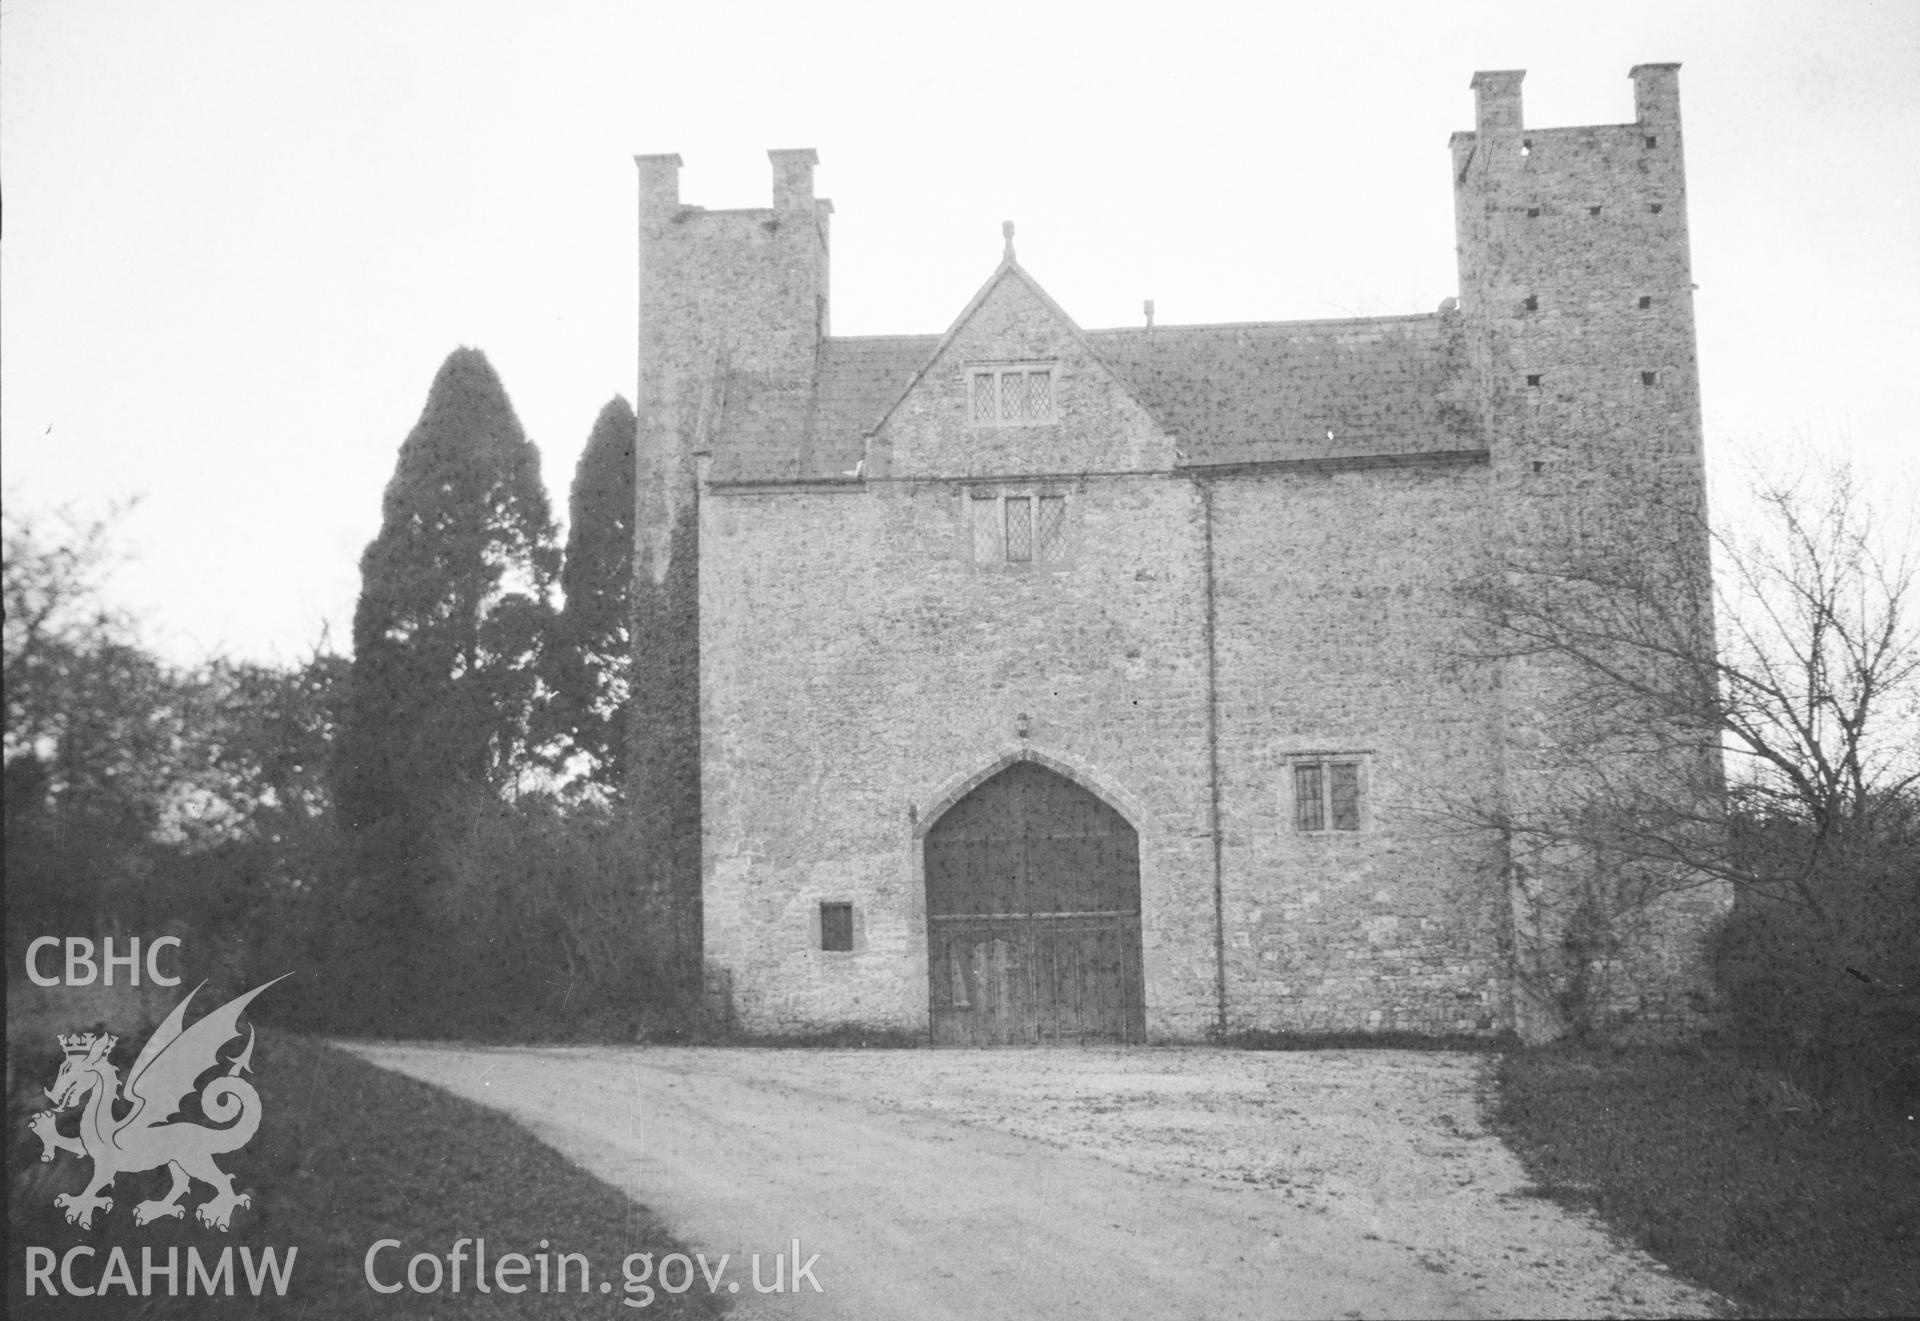 Digital copy of a nitrate negative showing unidentified building. From the Cadw Monuments in Care Collection.